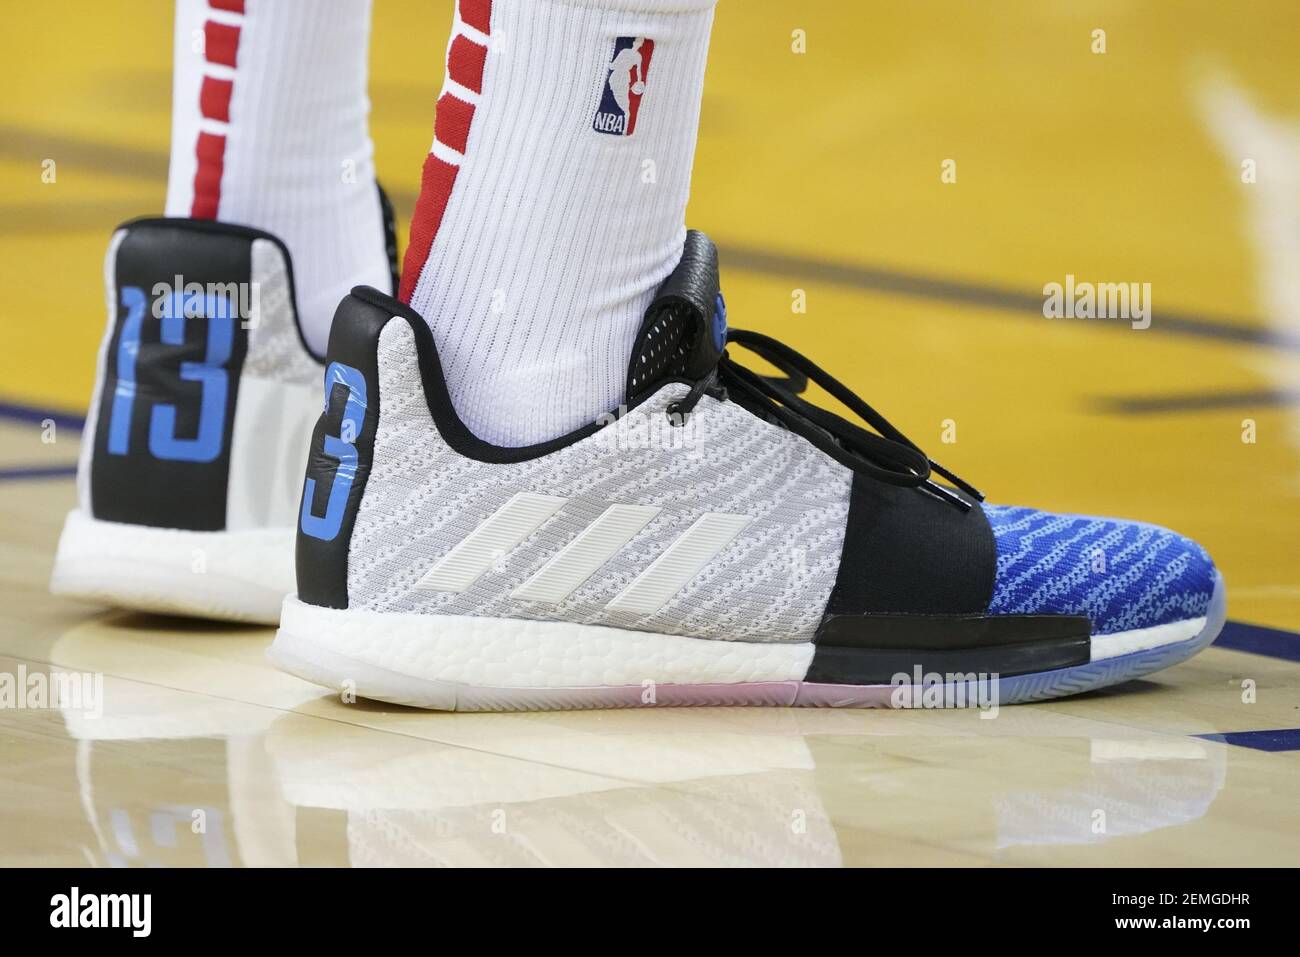 February 23, 2019; Oakland, CA, USA; Detail view of Adidas shoes worn by  Houston Rockets guard Gerald Green (14) during the first quarter against  the Golden State Warriors at Oracle Arena. Mandatory